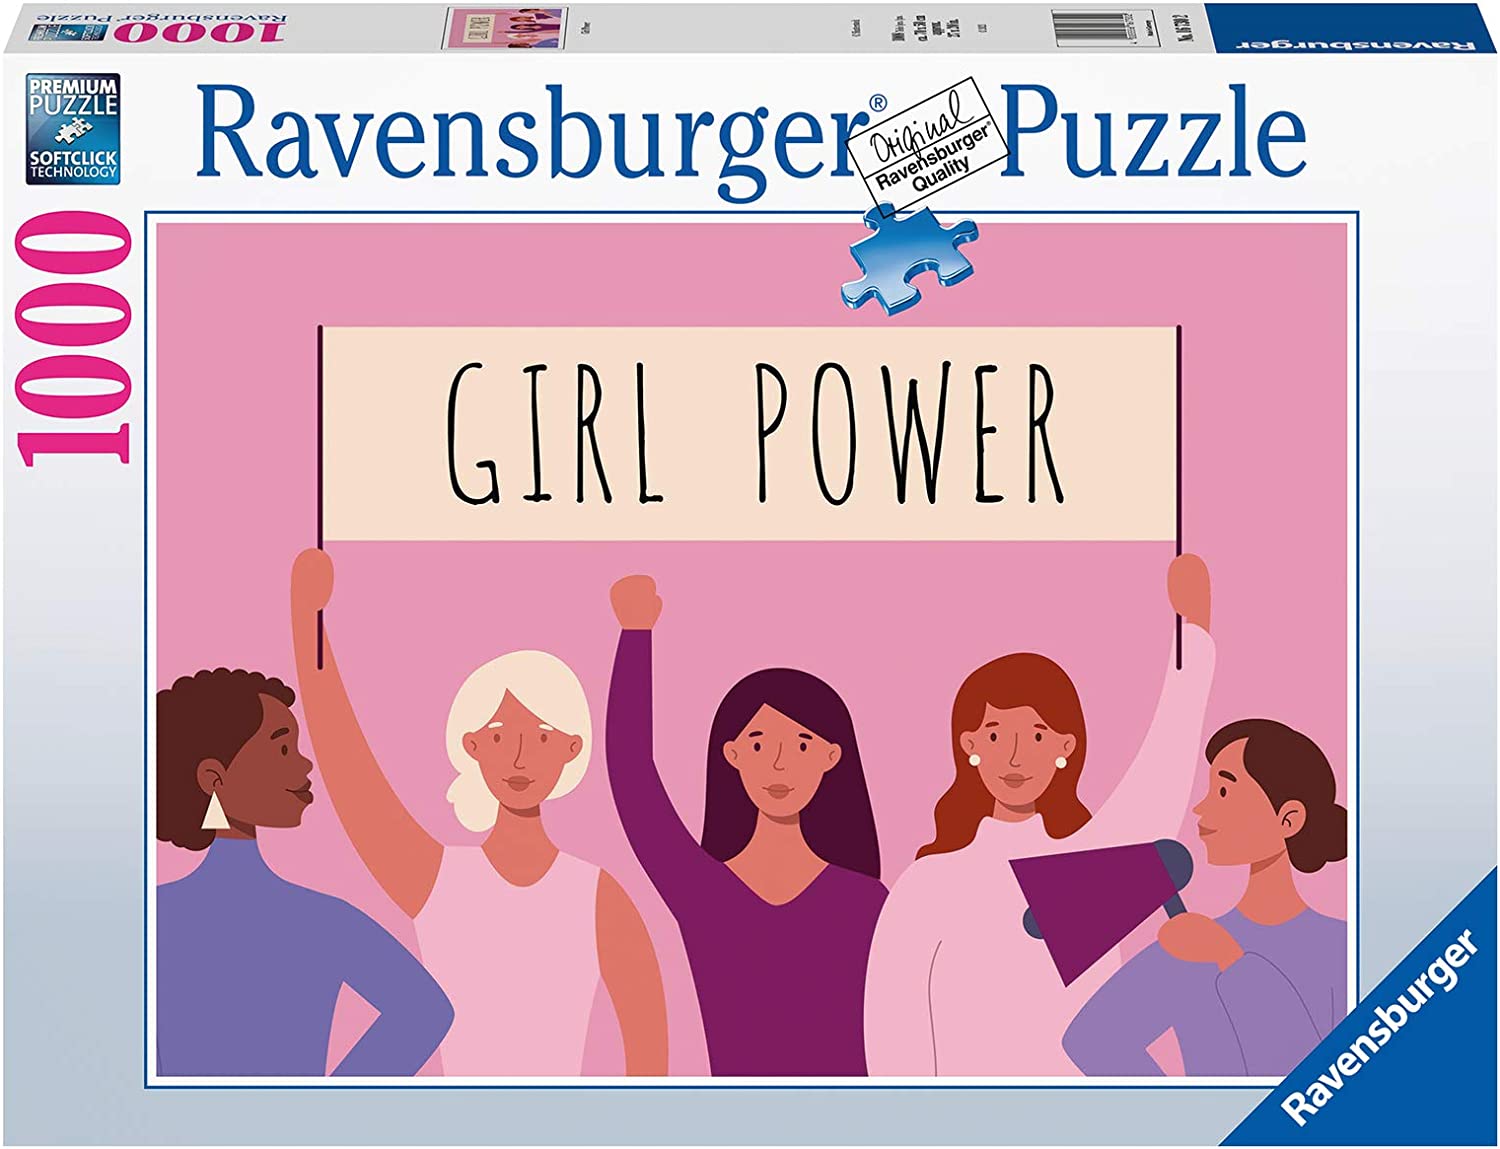 Ravensburger - Girl Power 1000 Pieces - Jigsaw Puzzle